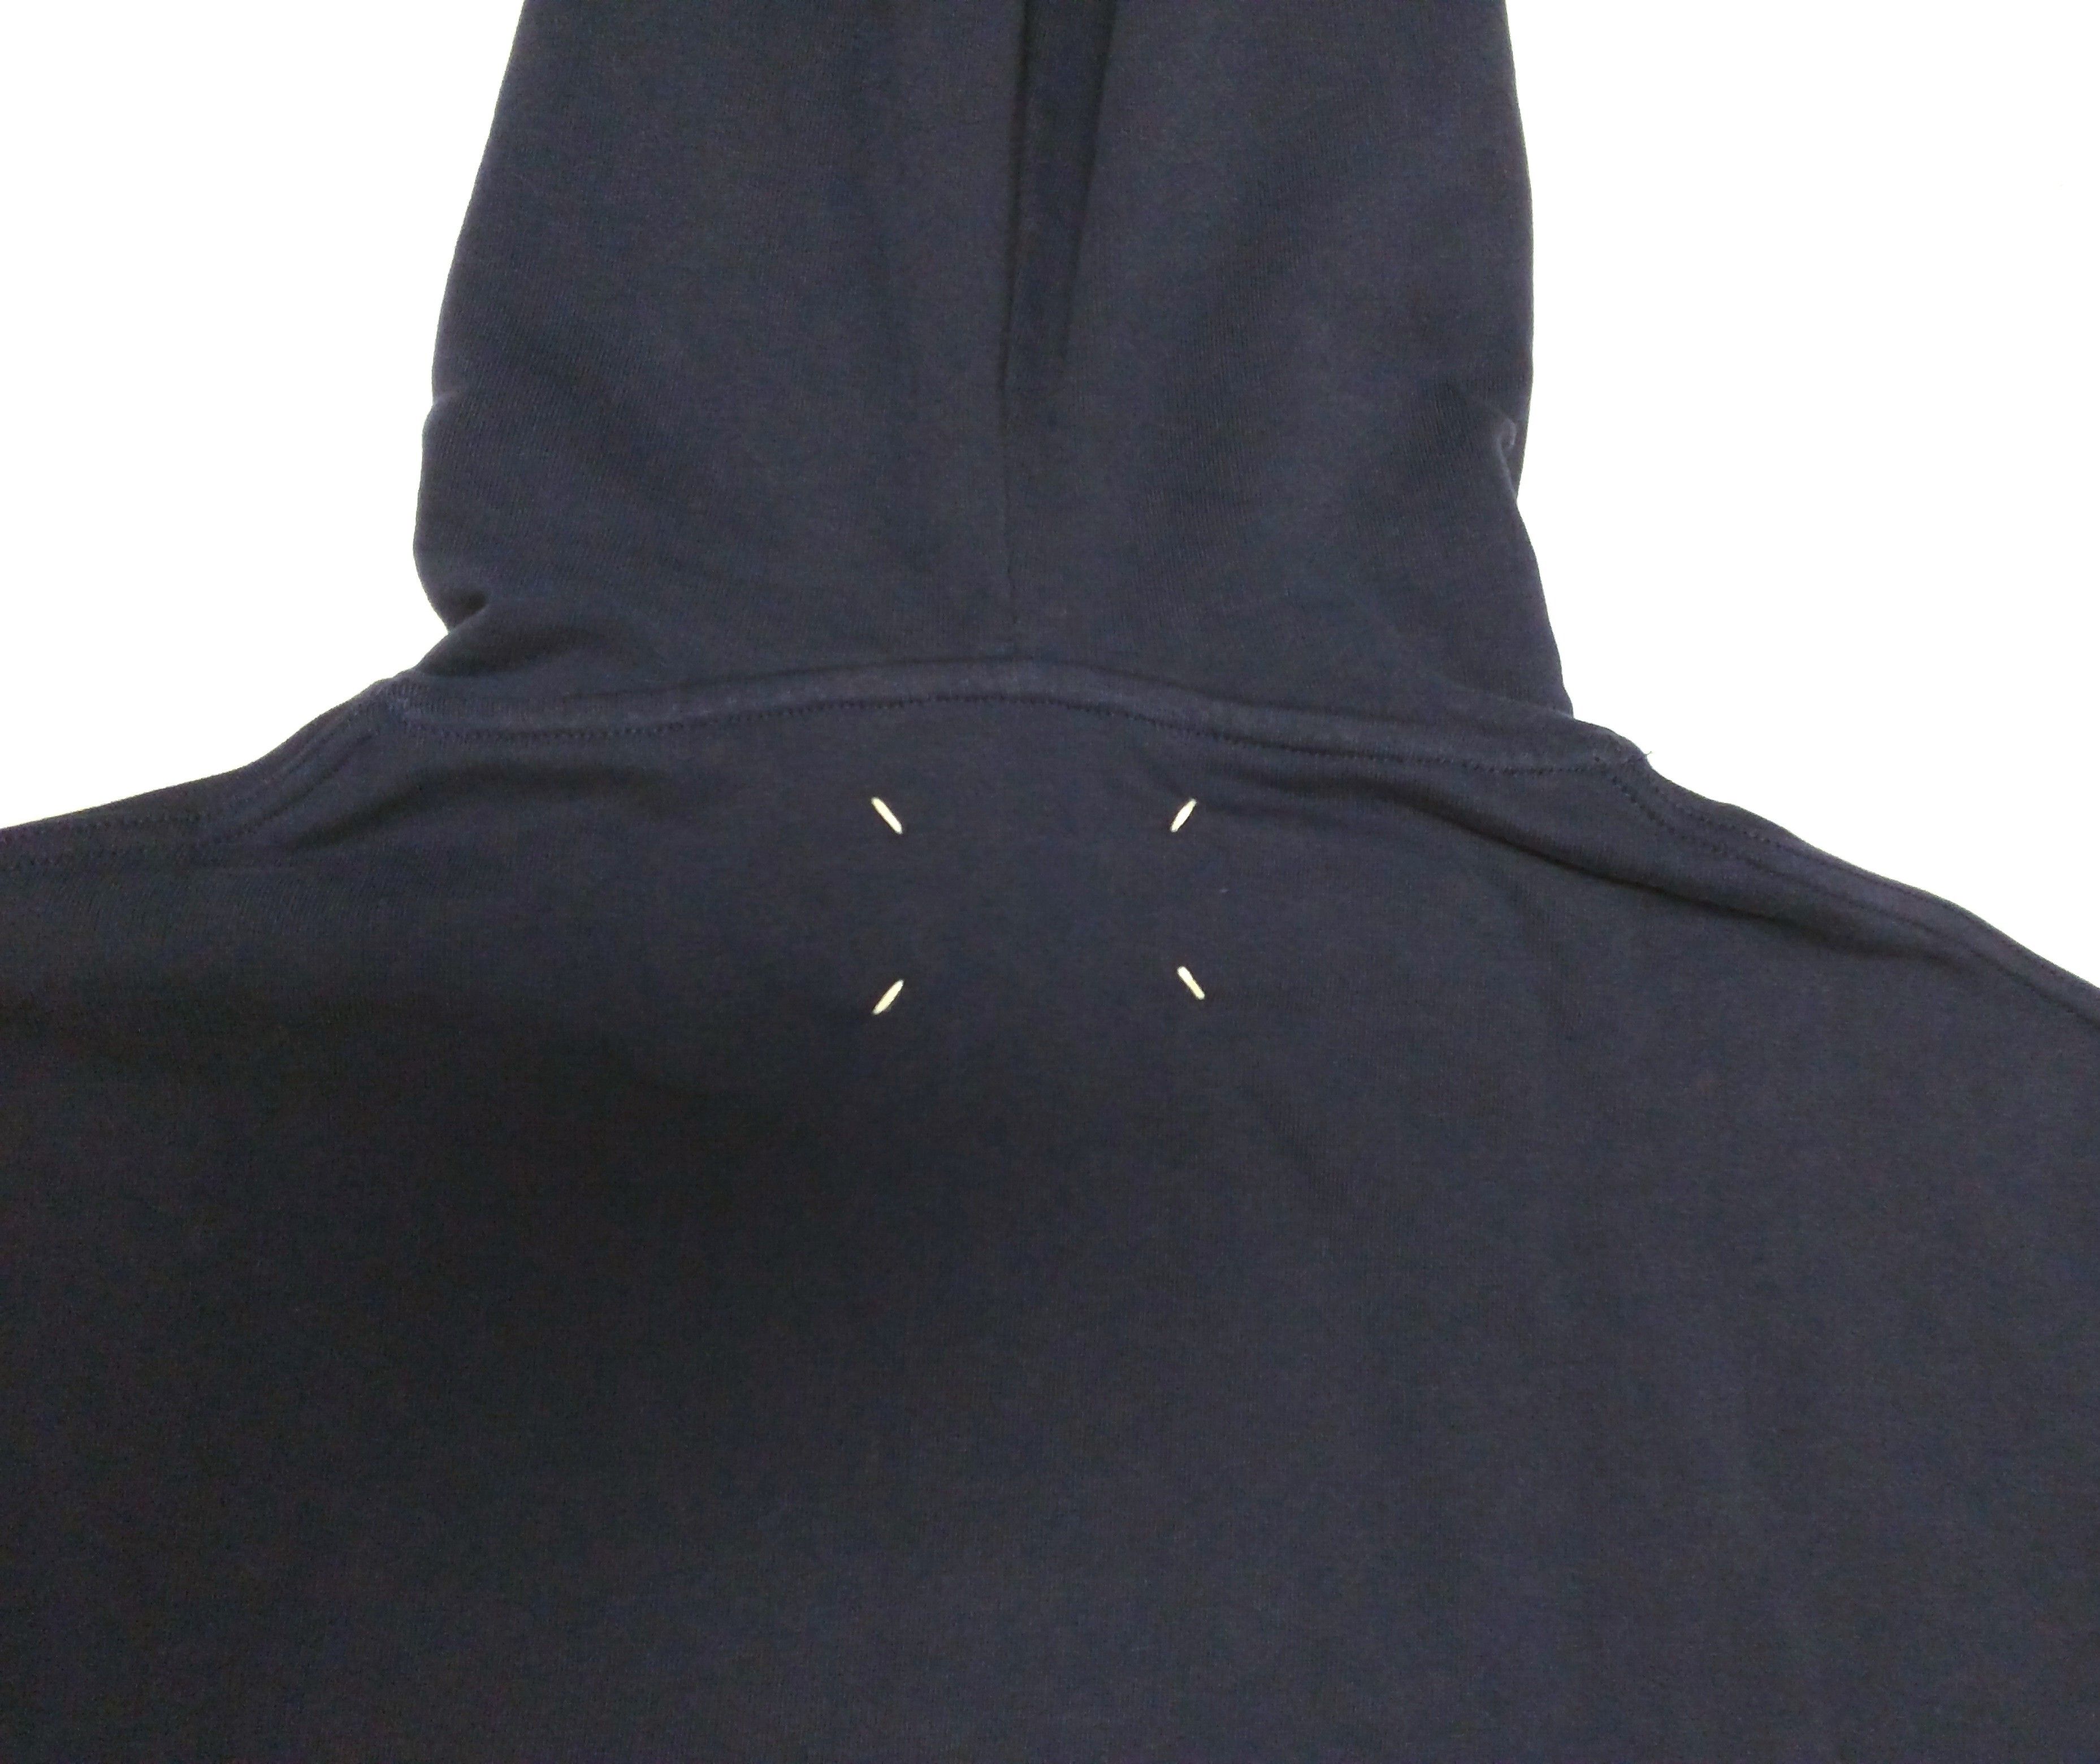 Maison Margiela Stereotype Hoodie Navy Blue 48 MMM Pullover Size US L / EU 52-54 / 3 - 9 Thumbnail